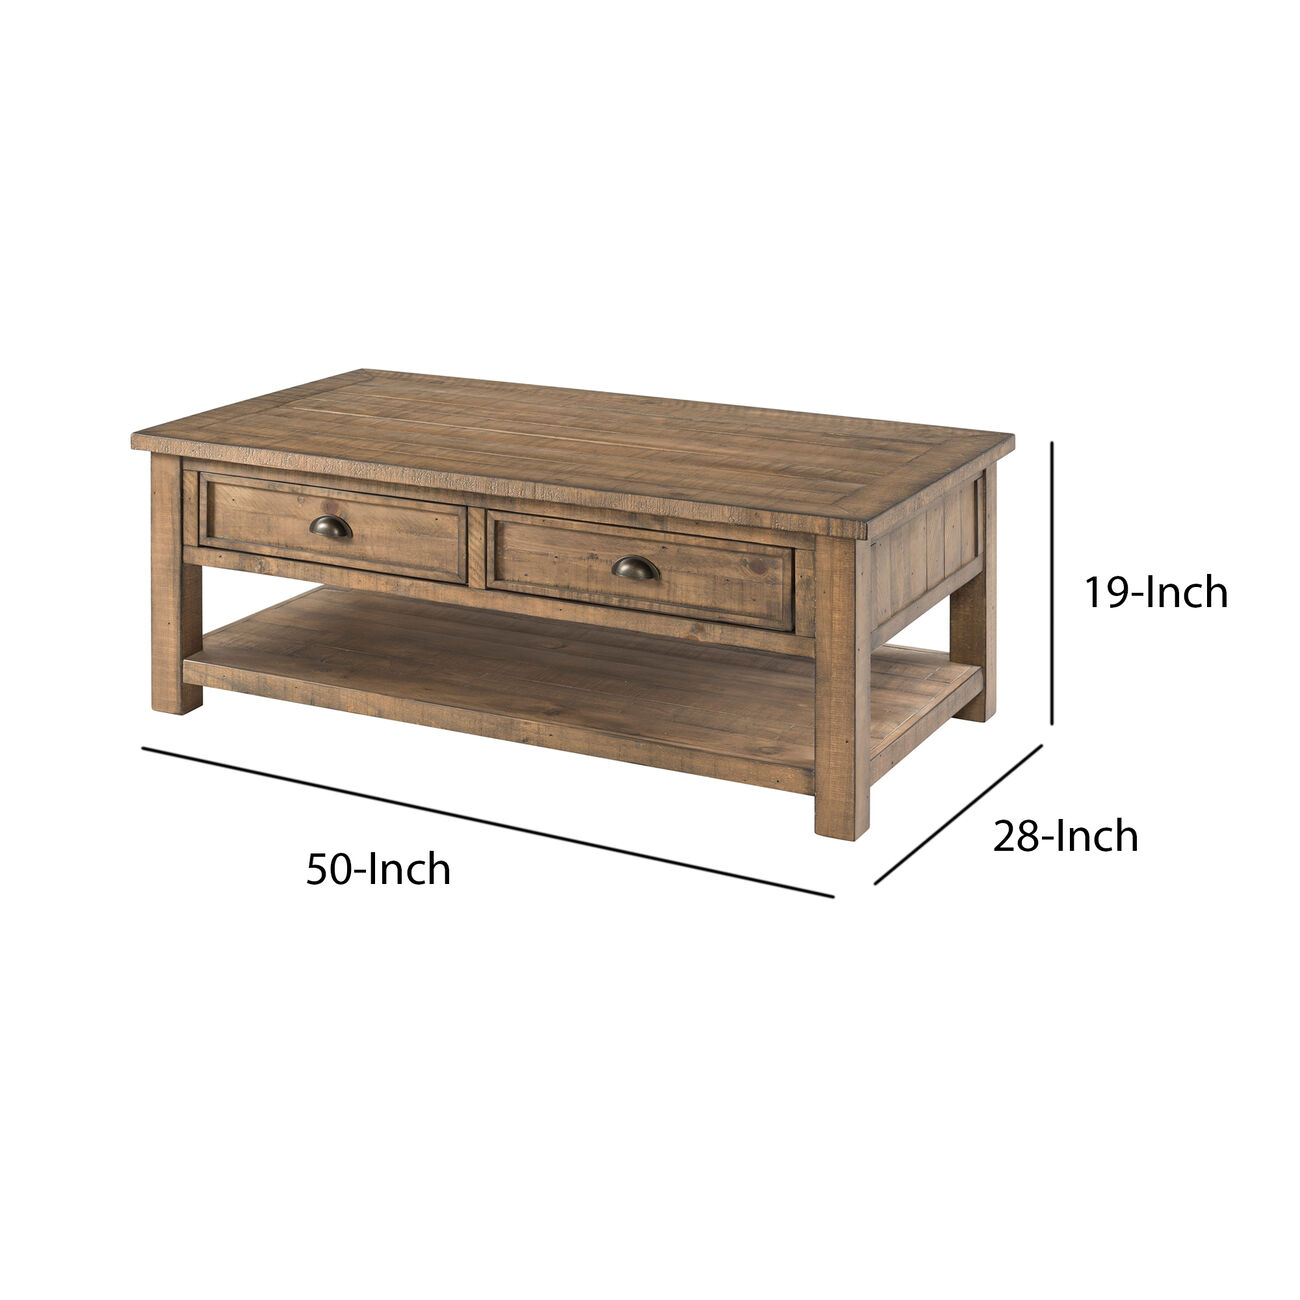 Coastal Style Rectangular Wooden Coffee Table with 2 Drawers, Brown